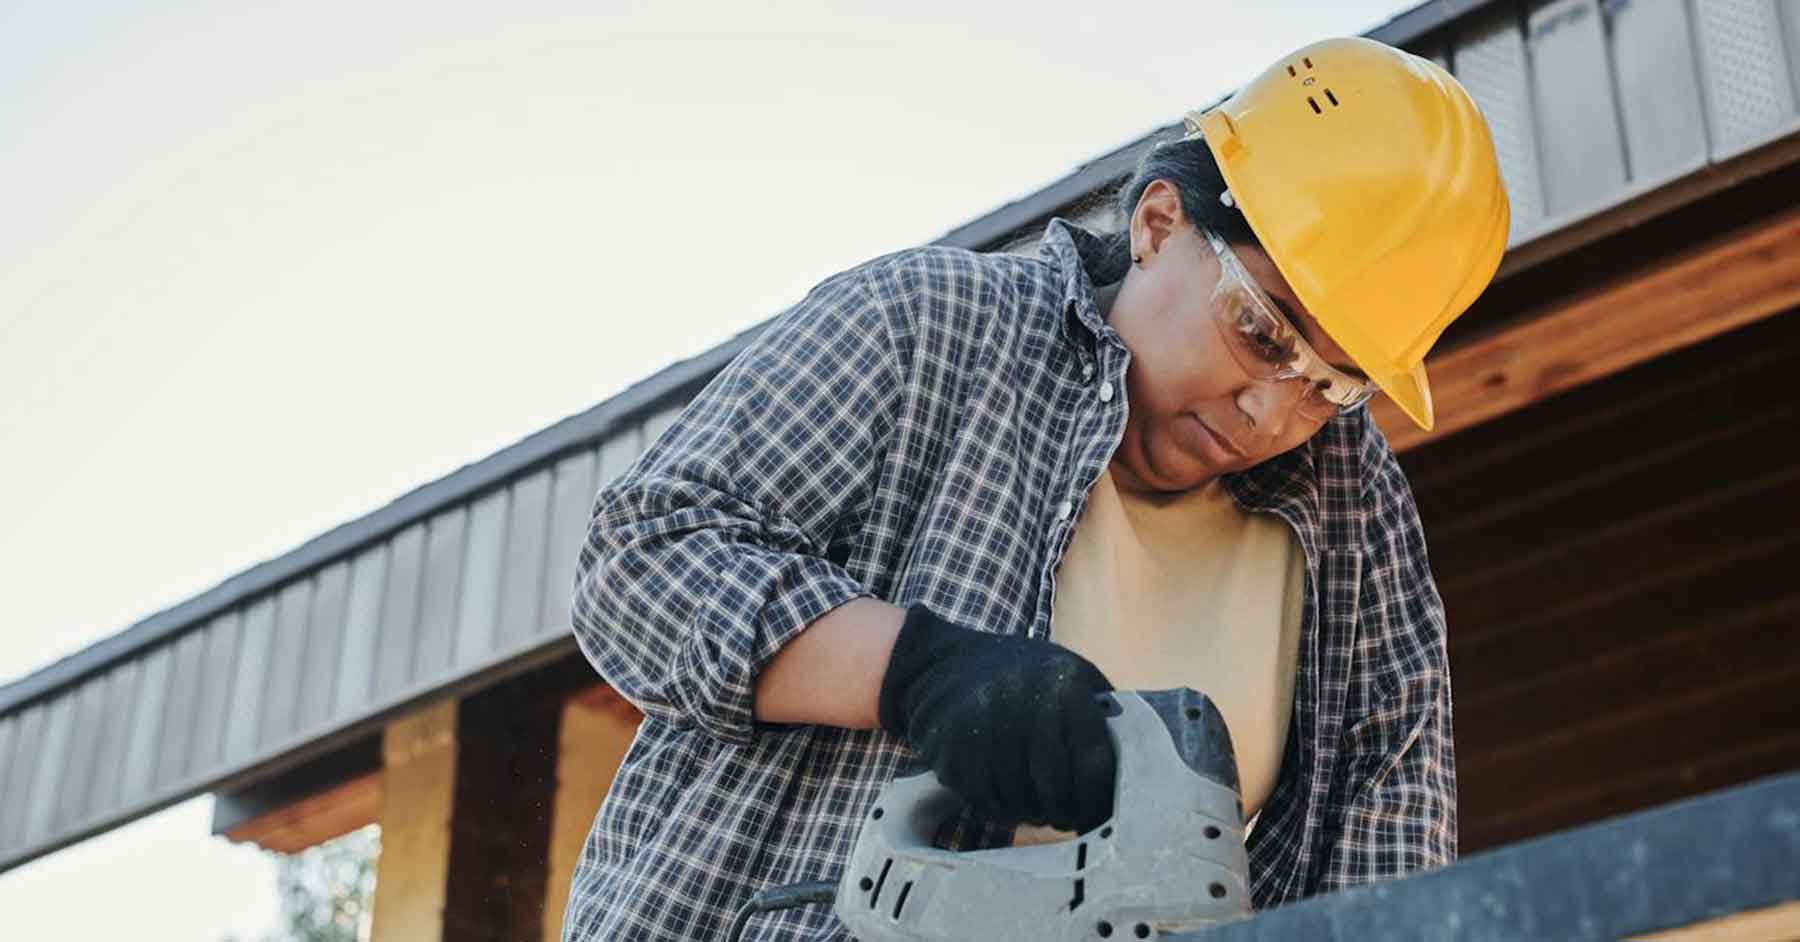 Women in the construction industry: How to get ahead